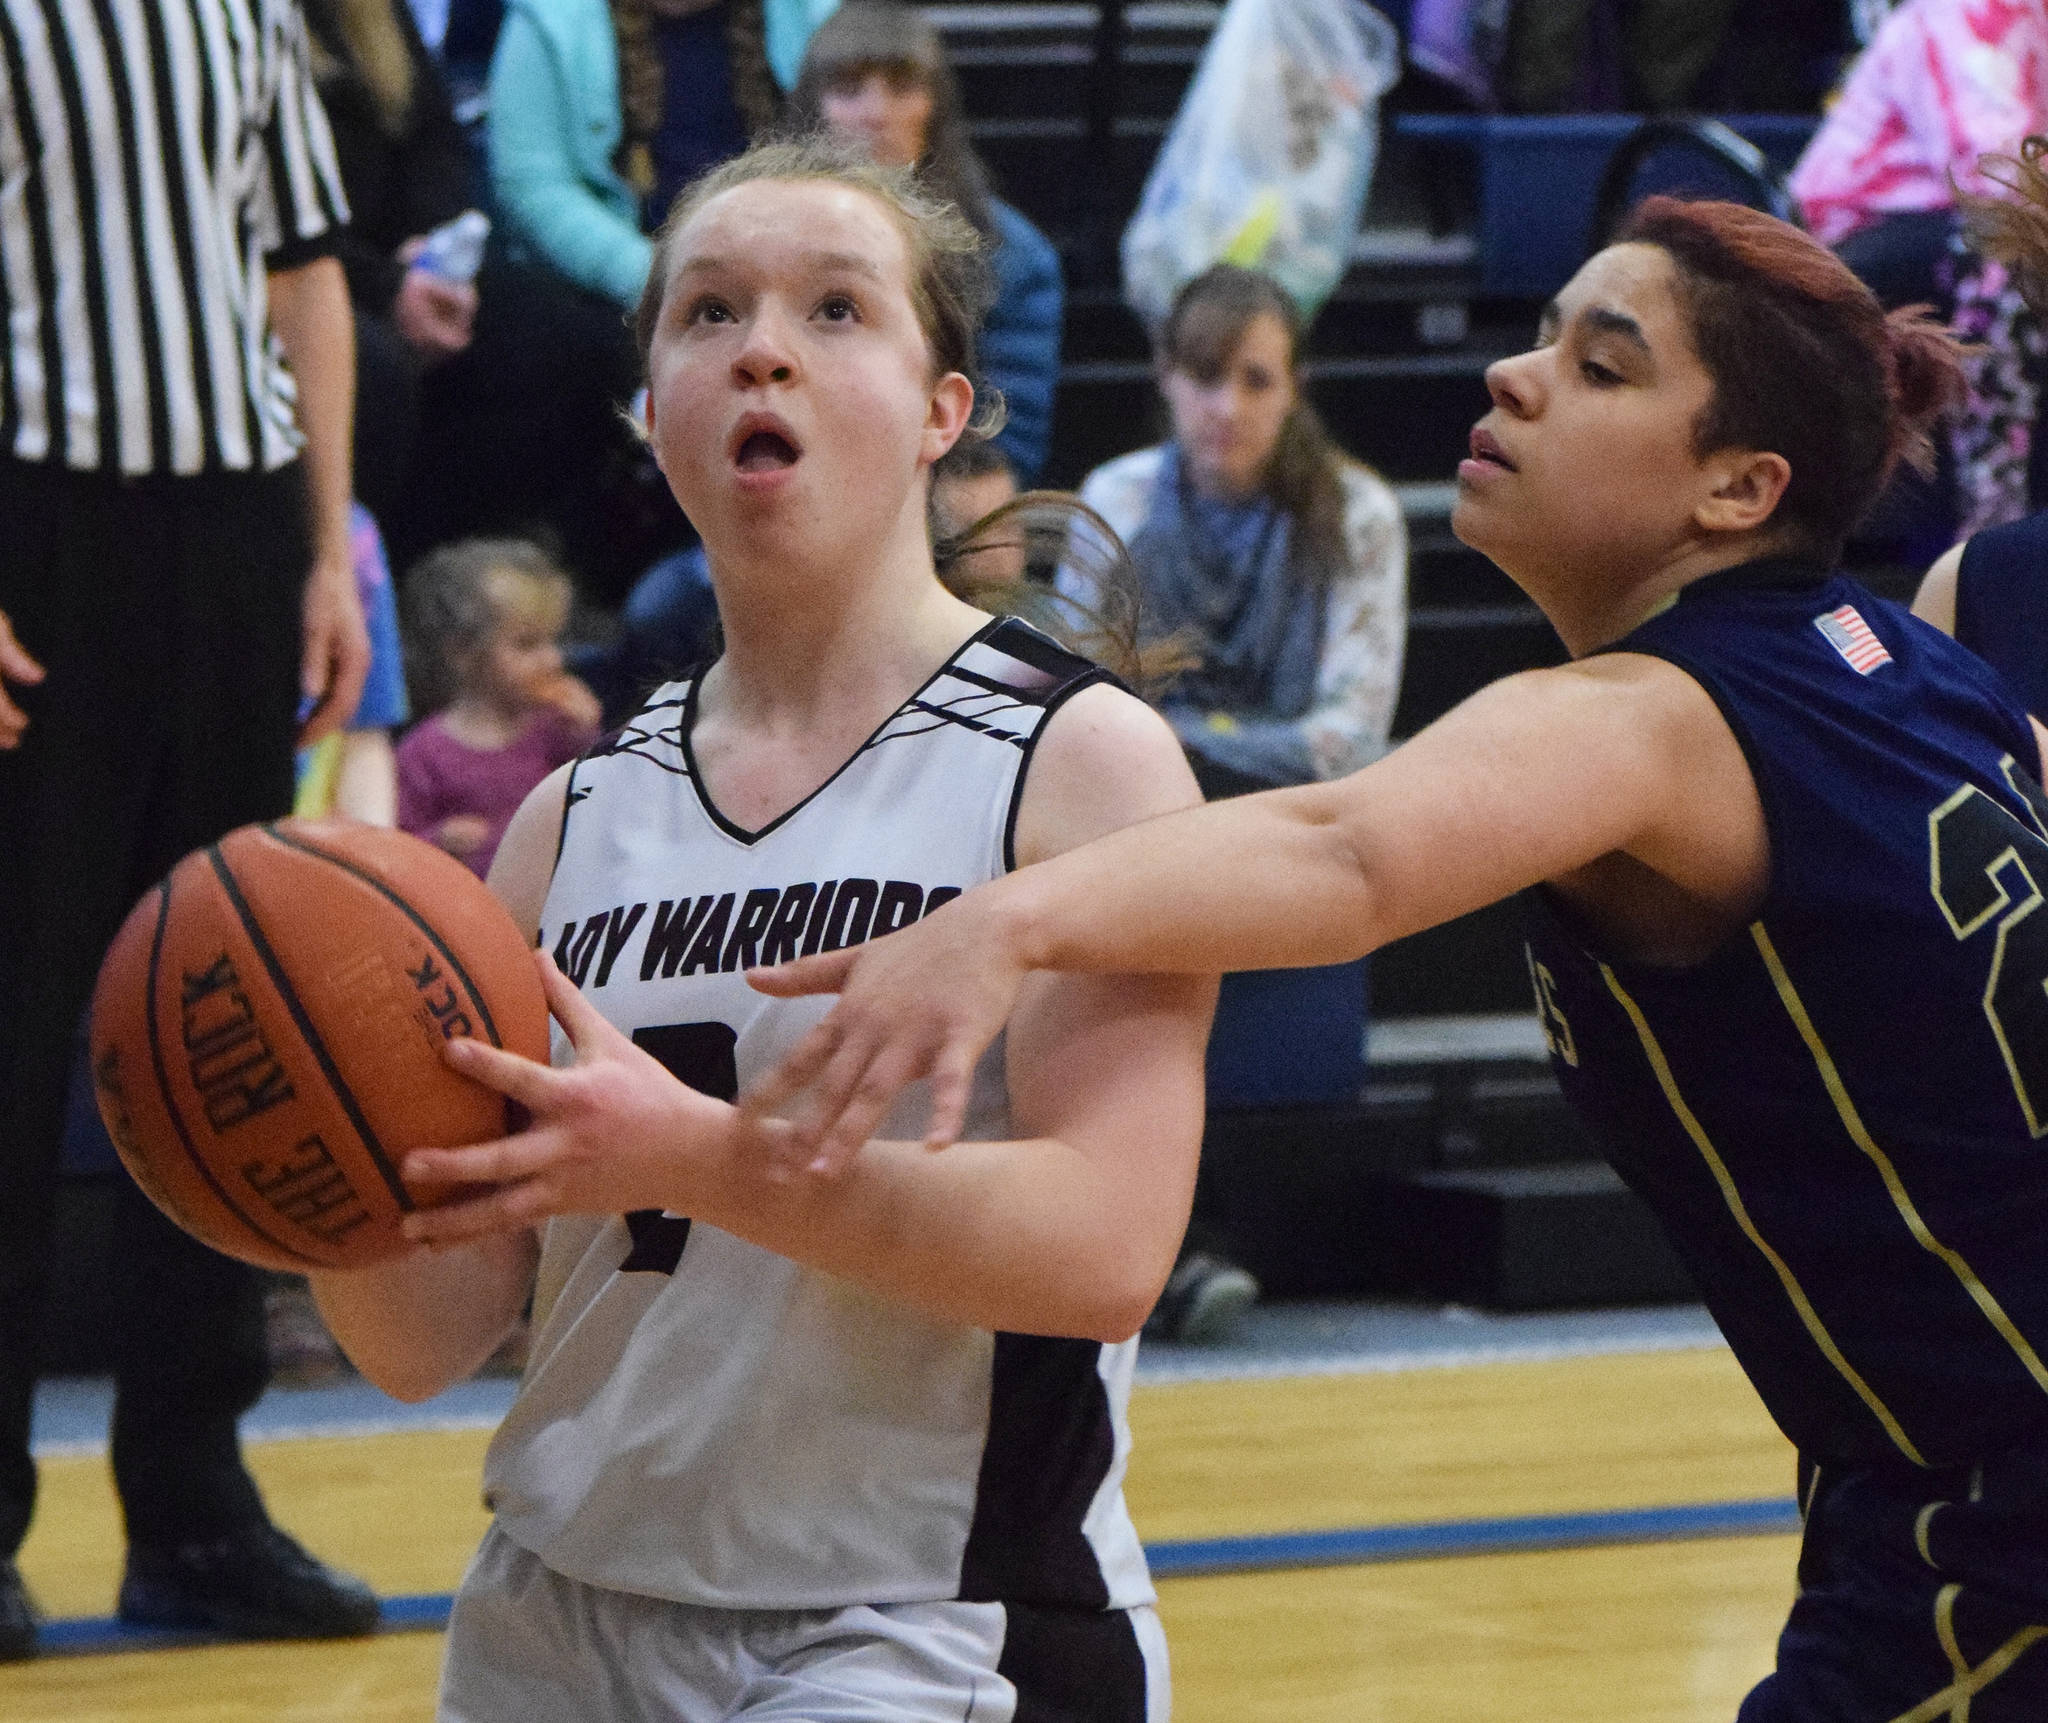 Nikolaevsk’s Sophia Klaich (left) drives by Ninilchik defender Jade Robuck Saturday in the Peninsula Conference girls second-place contest. (Photo by Joey Klecka/Peninsula Clarion)